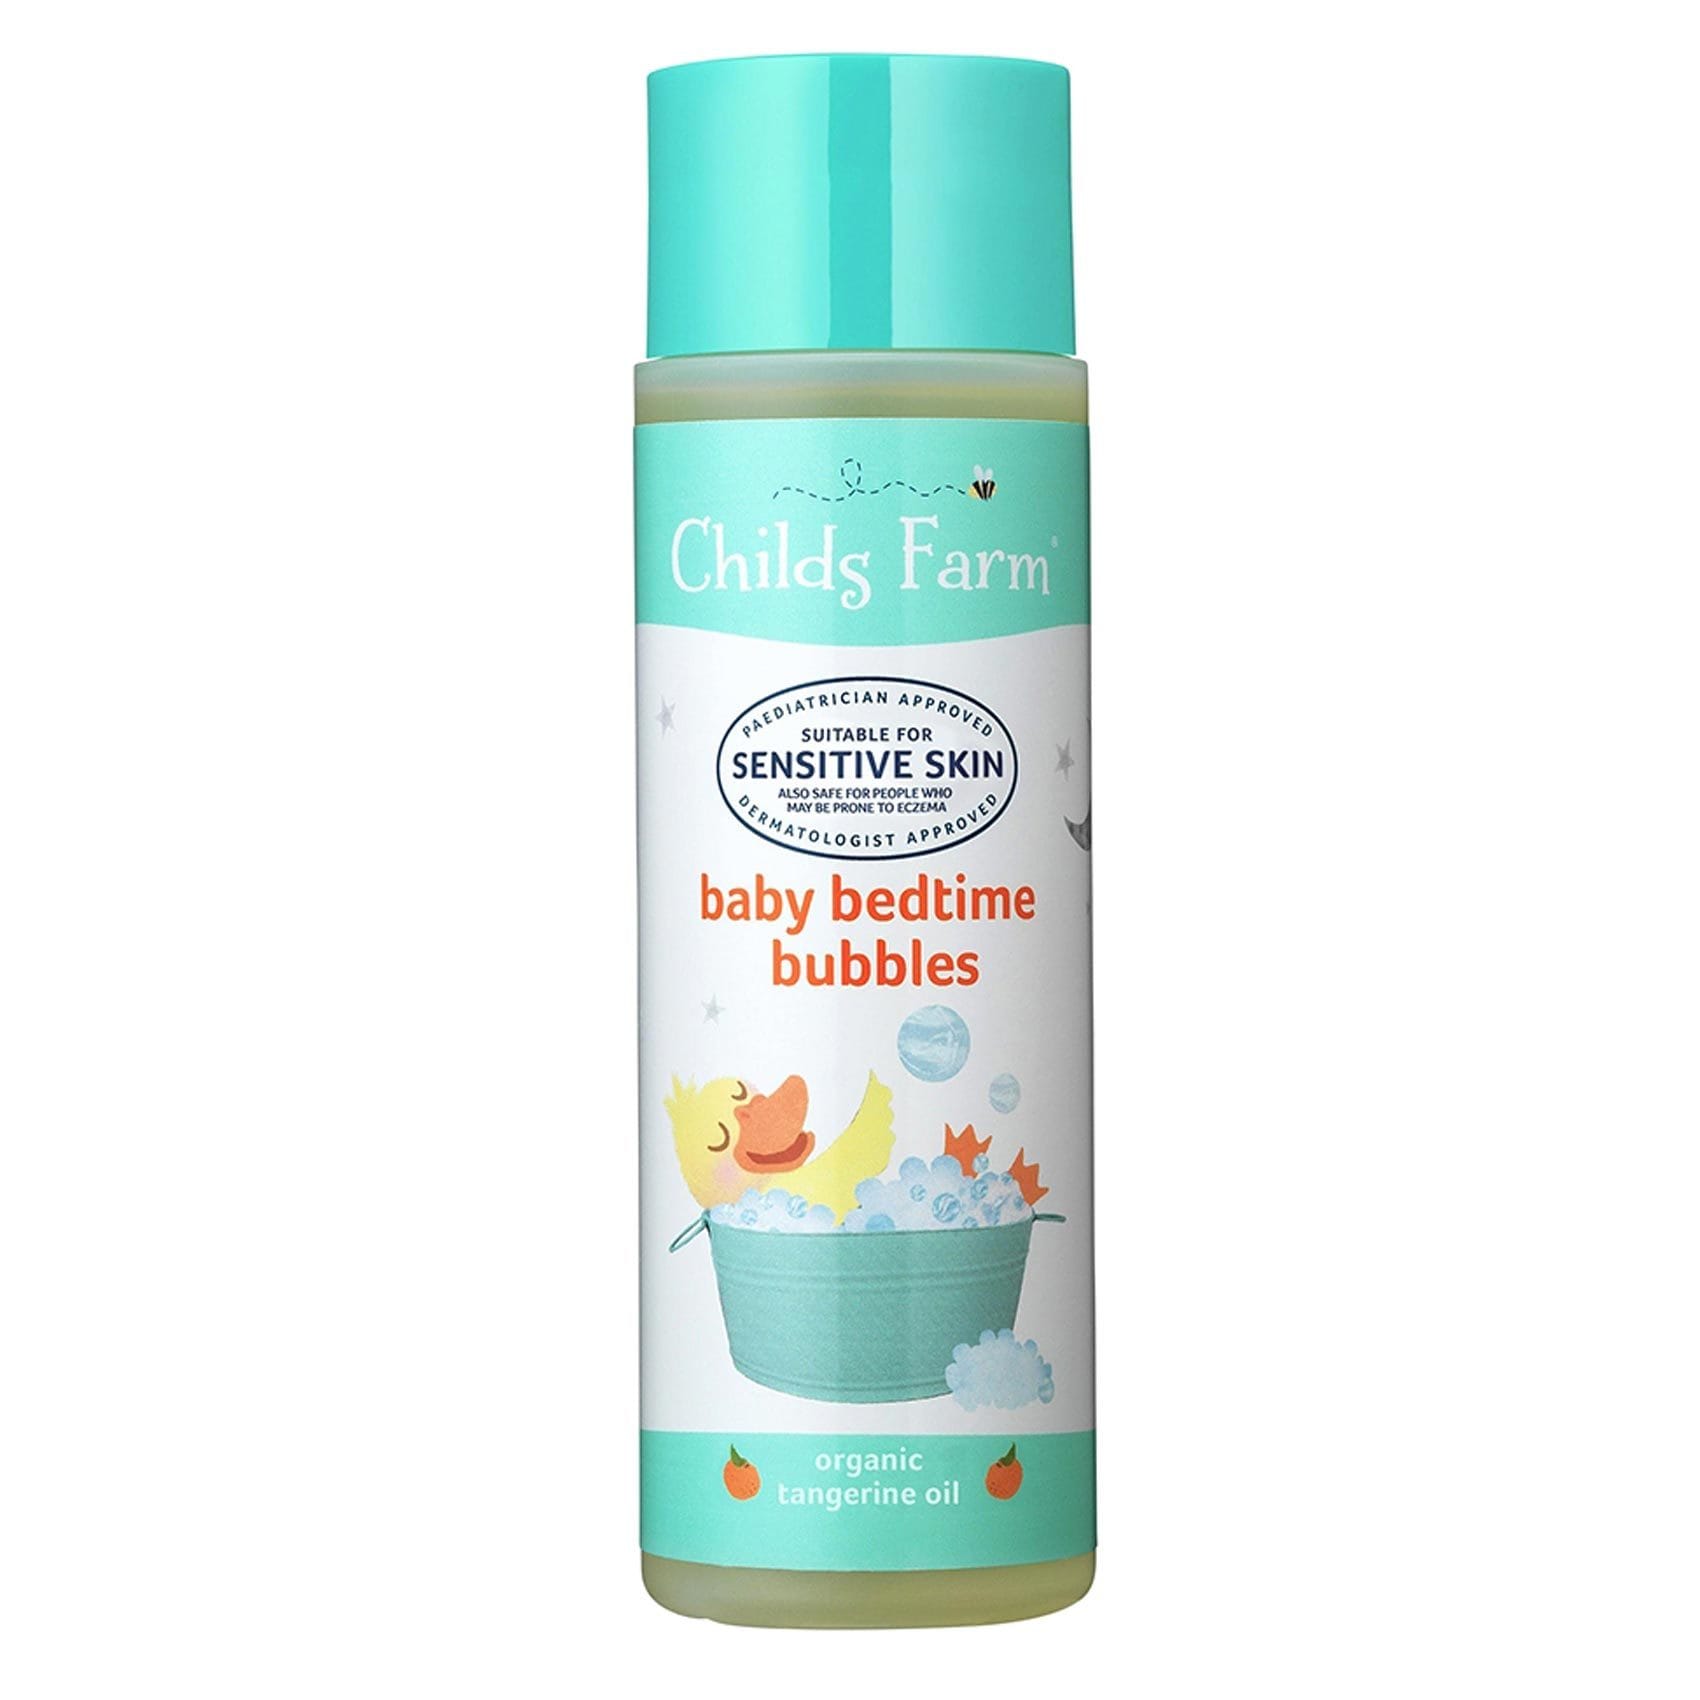 Buy Childs Farm Organic Tangerine Baby Bedtime Bubble Bath Oil For Sensitive Skin 250ml Online Shop Baby Products On Carrefour Uae